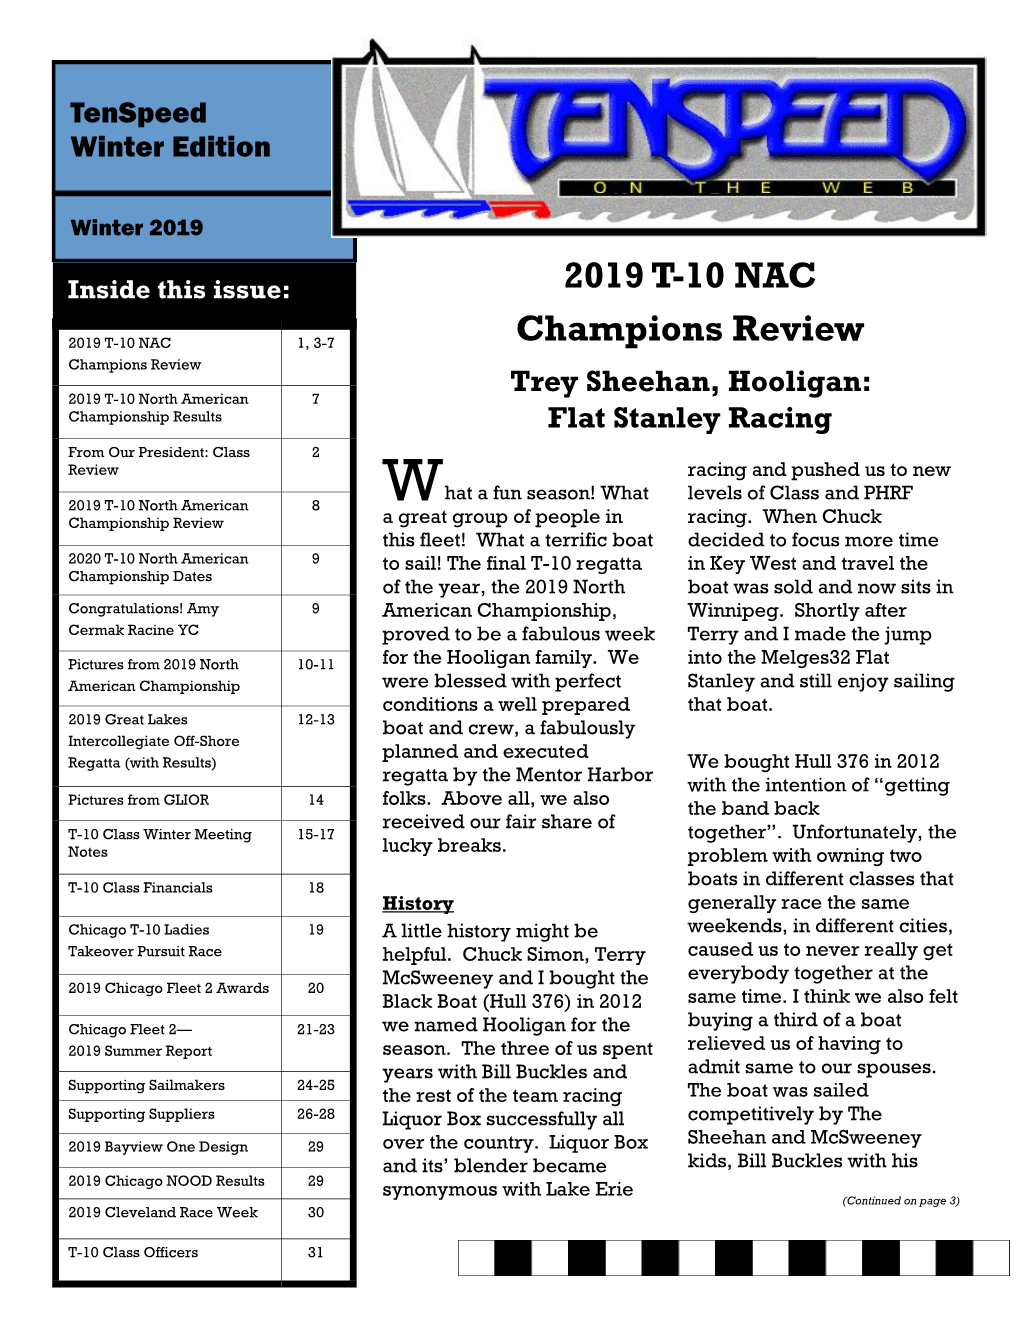 2019 T-10 NAC Champions Review